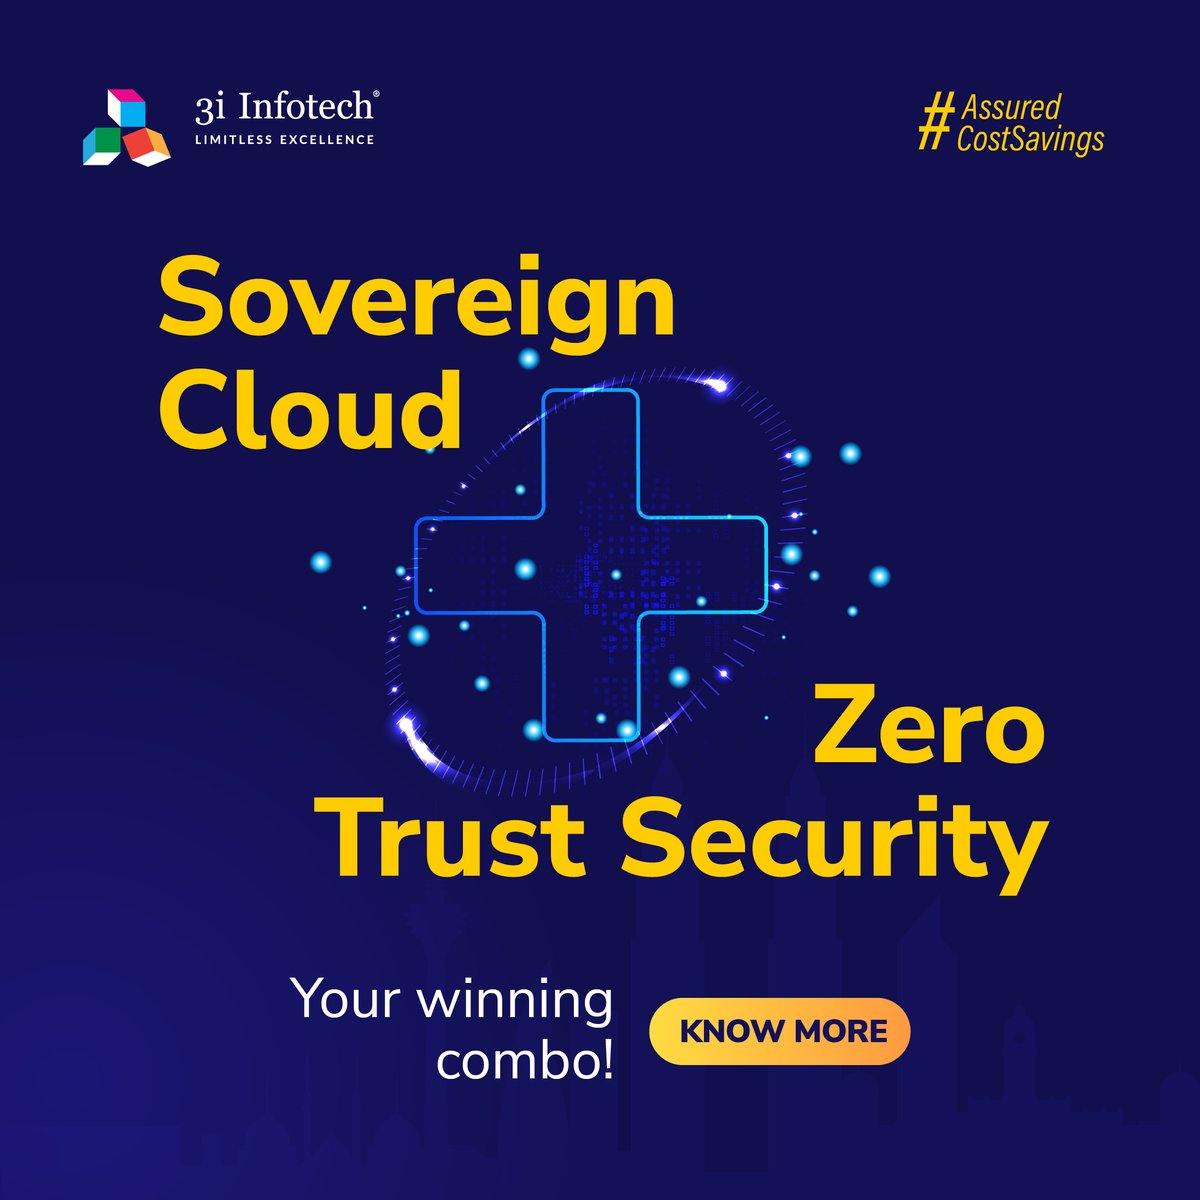 Experience the power of synergy, Sovereign Cloud + Zero Trust Security - Unmatched Security and Efficiency. A partnership that guarantees robust security while ensuring your business scales seamlessly.  

zurl.co/97rM 

#sovereigncloud #cloud #ZeroTrust #cloudsecurity